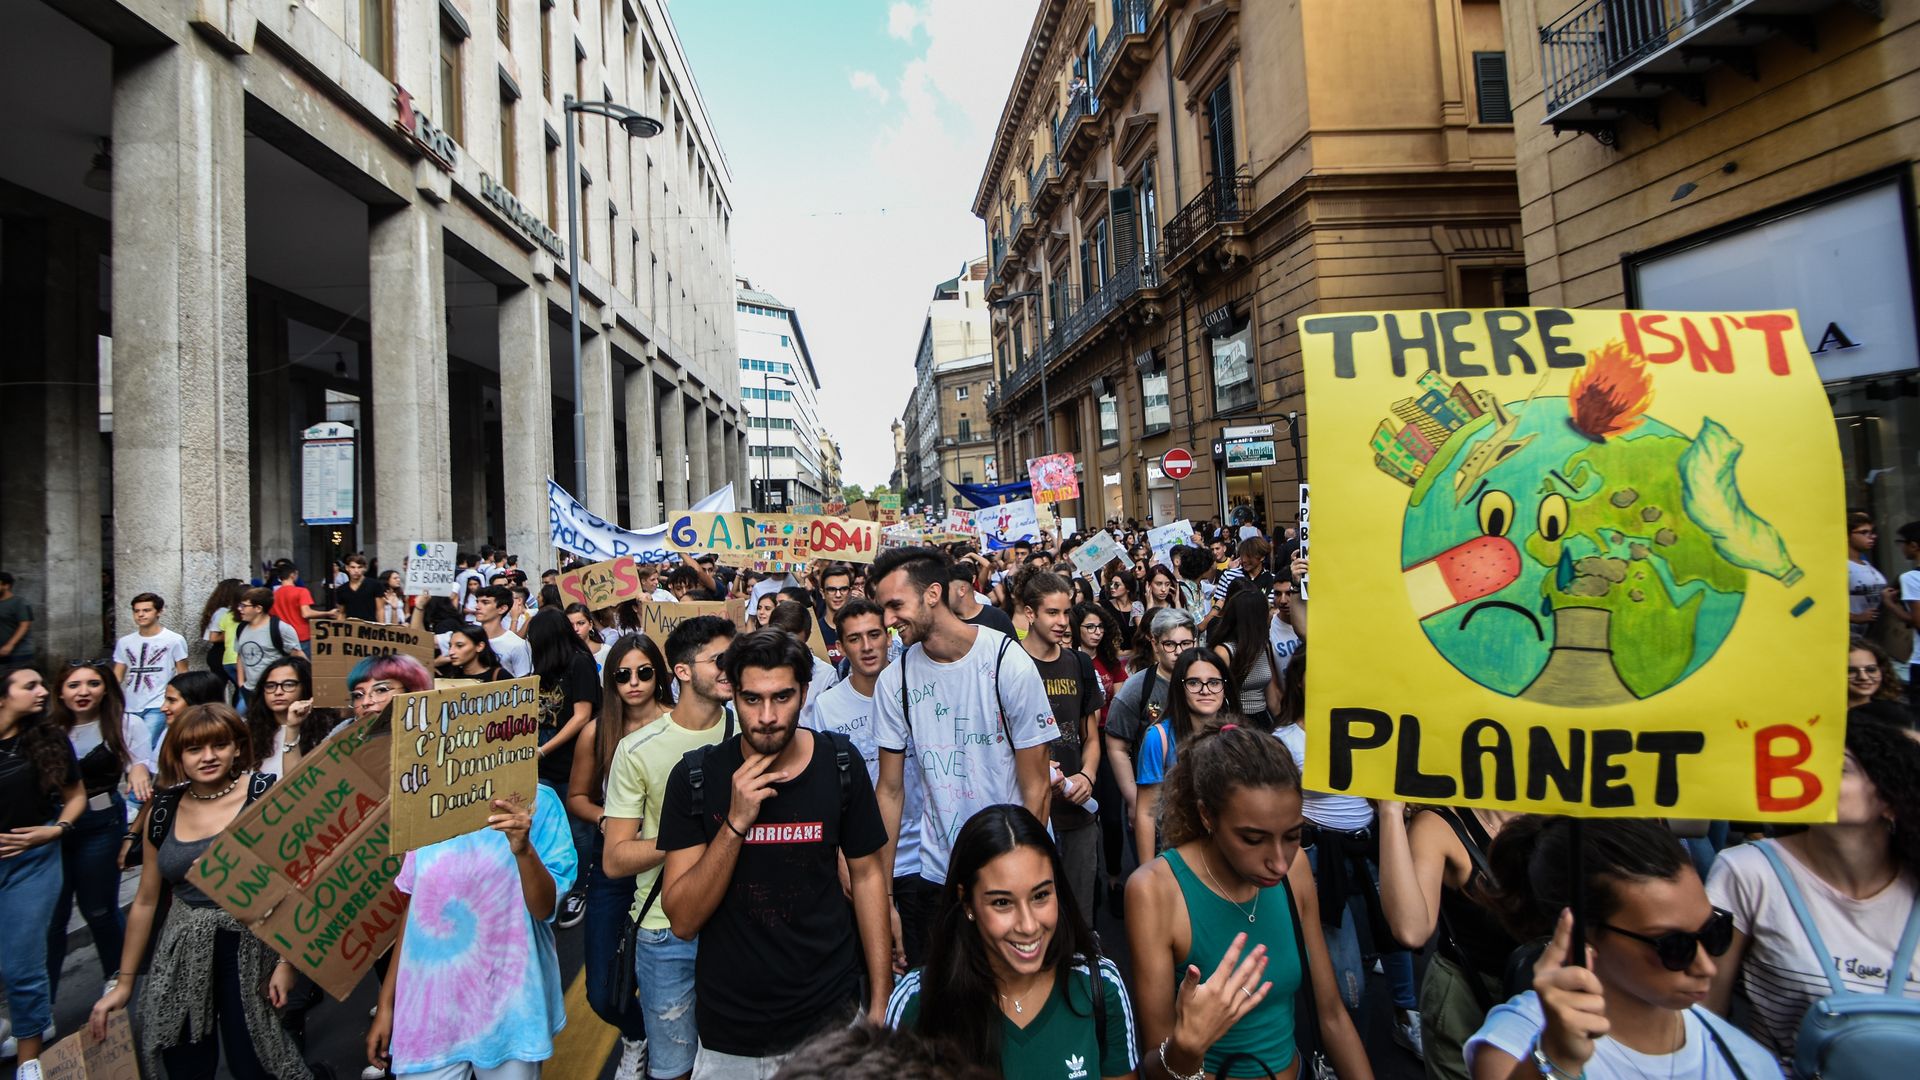 This image shows a long crowd of student protestors walking down a street in Italy with buildings on either side. A sign reads: "There is no Planet B" 